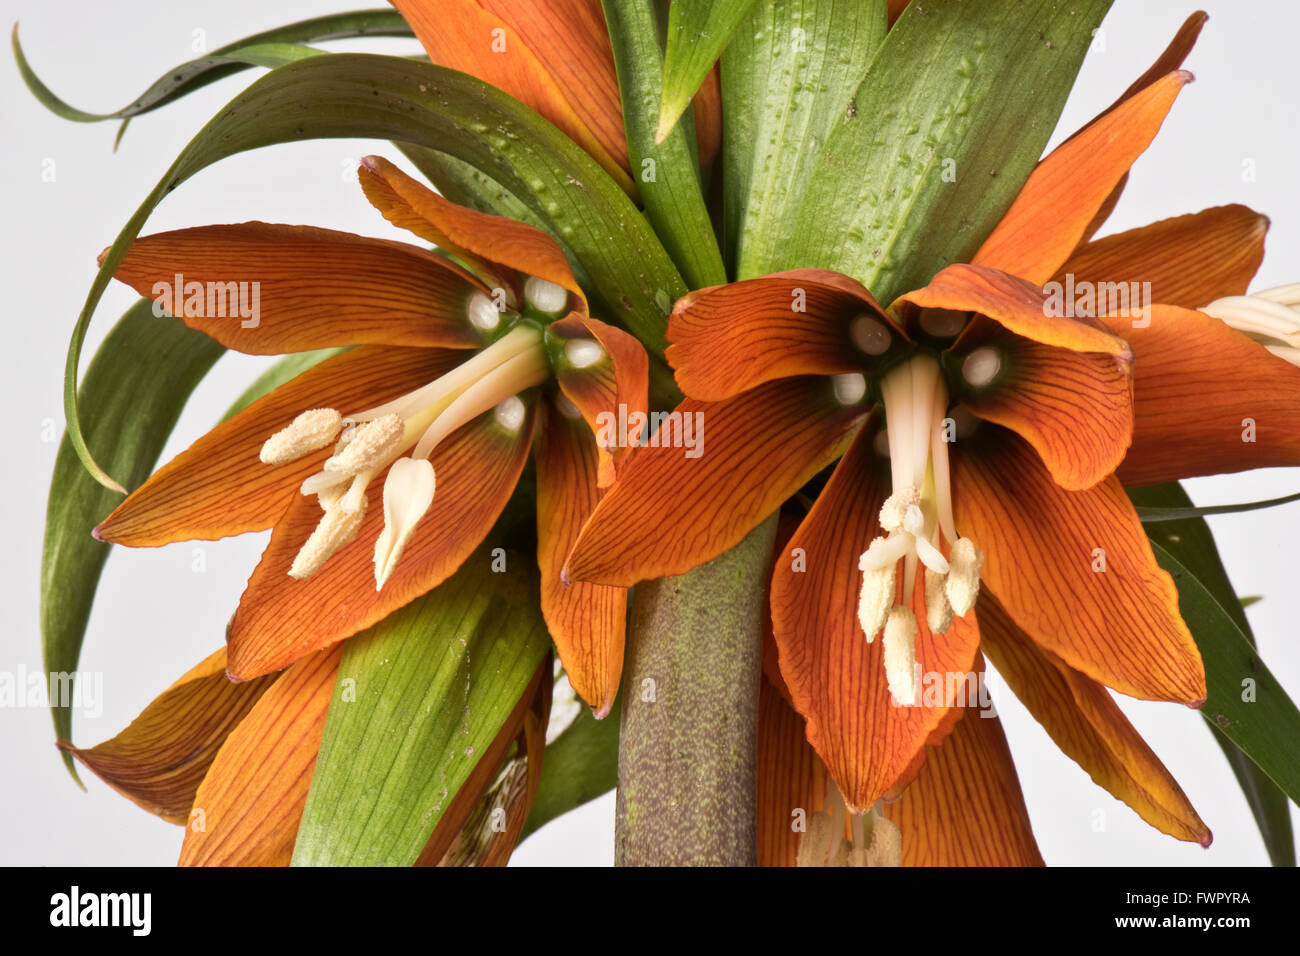 Flowers of crown imperial, Fritillaria imperialis, showing flower structure Stock Photo